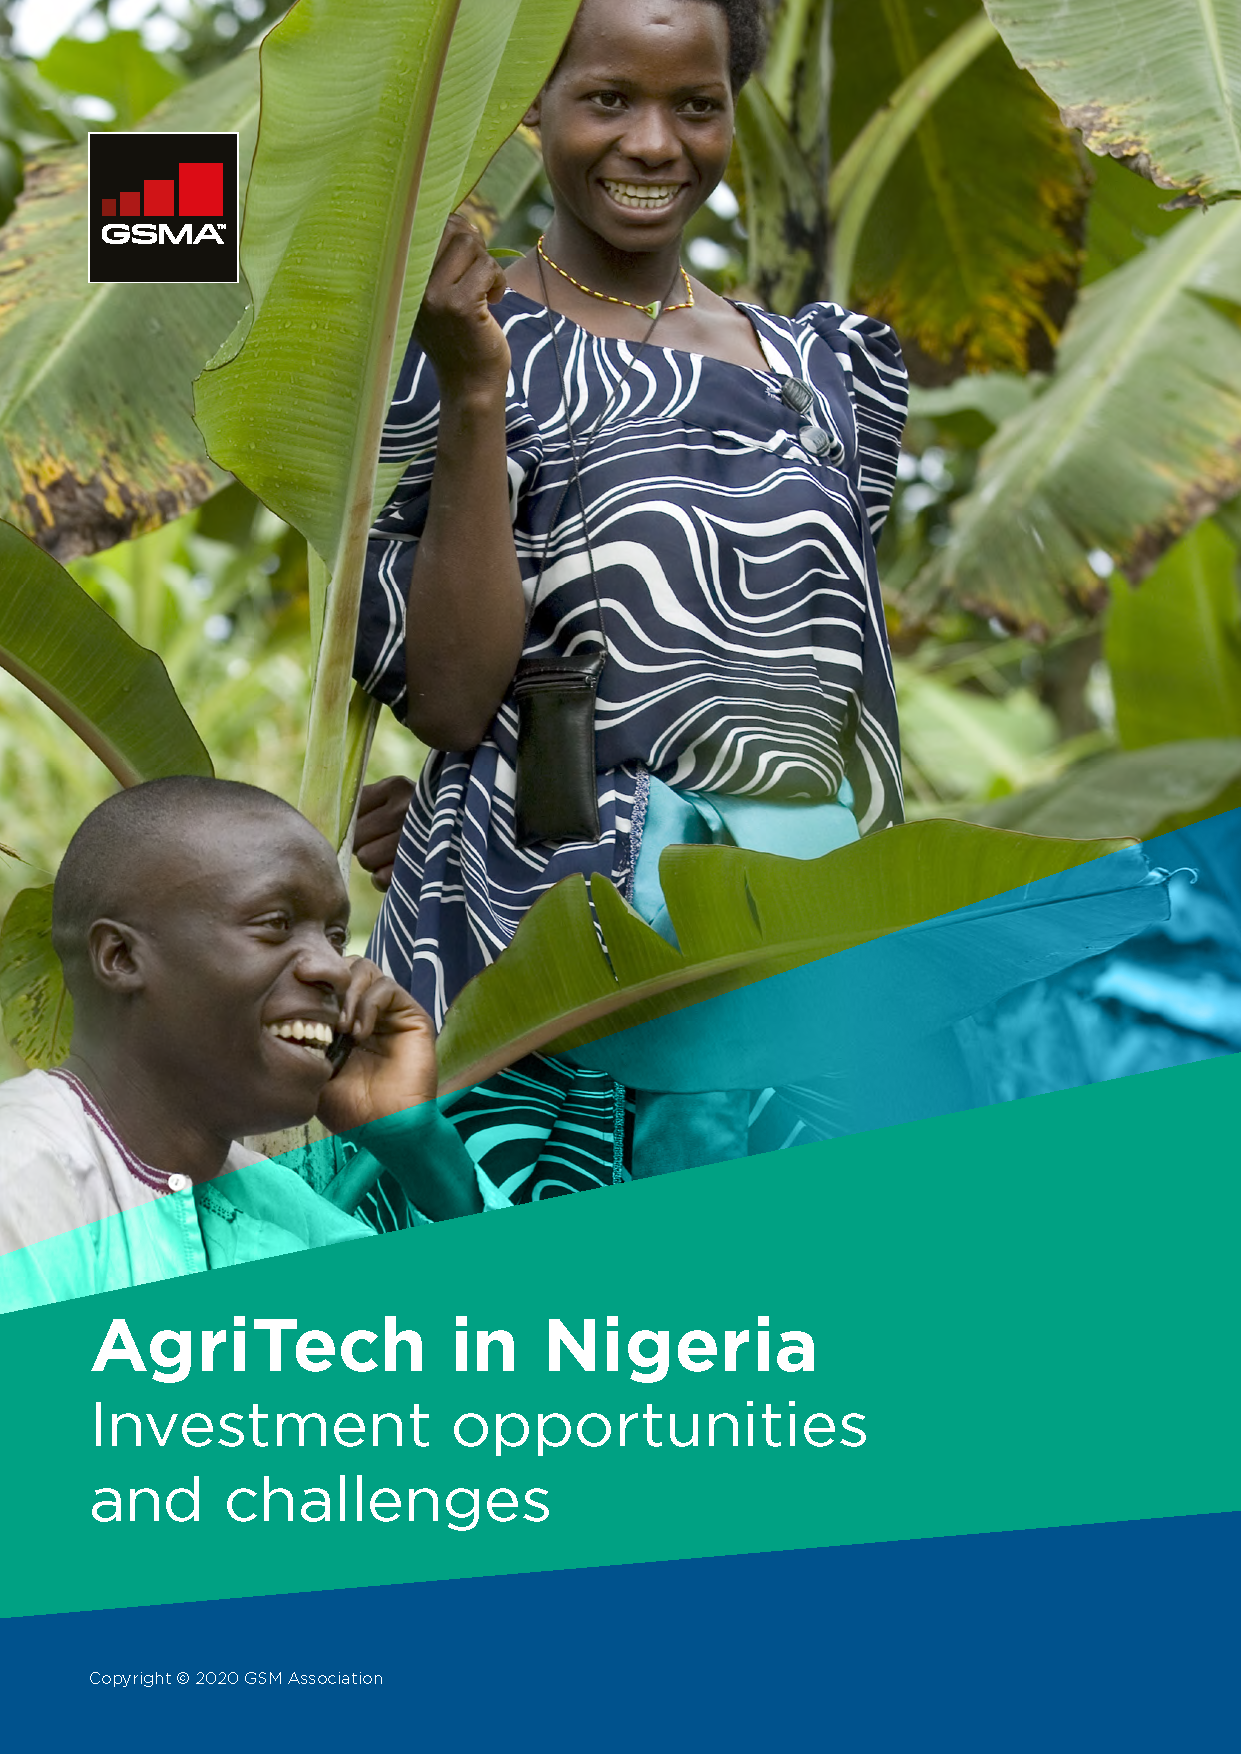 AgriTech in Nigeria: Investment opportunities and challenges image